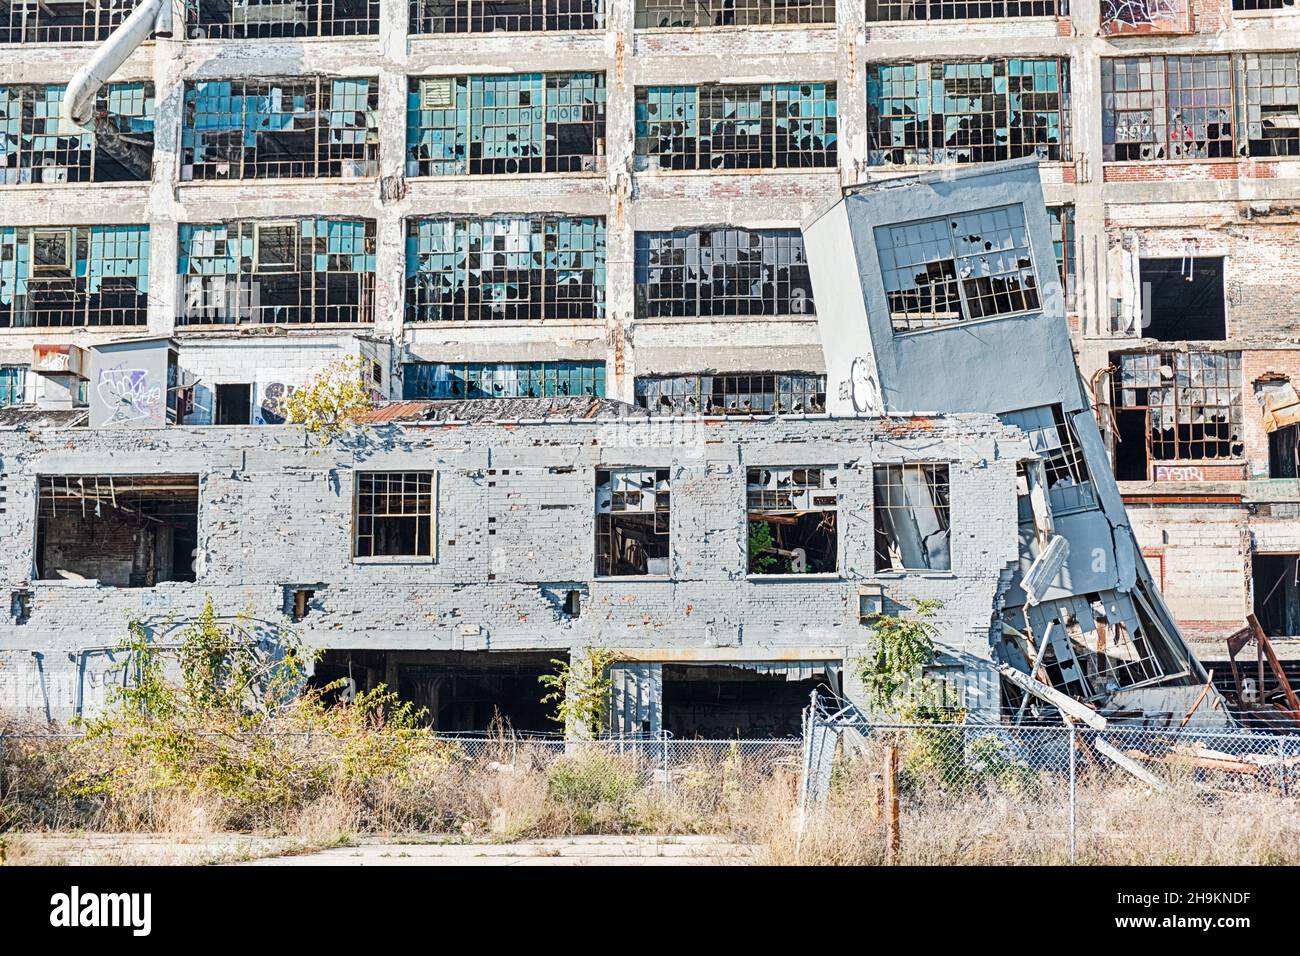 DETROIT, USA - OCTOBER 20, 2019: The wall of the old Fisher Body Works factory in Detroit has been painted a solid gray color to hide the graffiti. Stock Photo